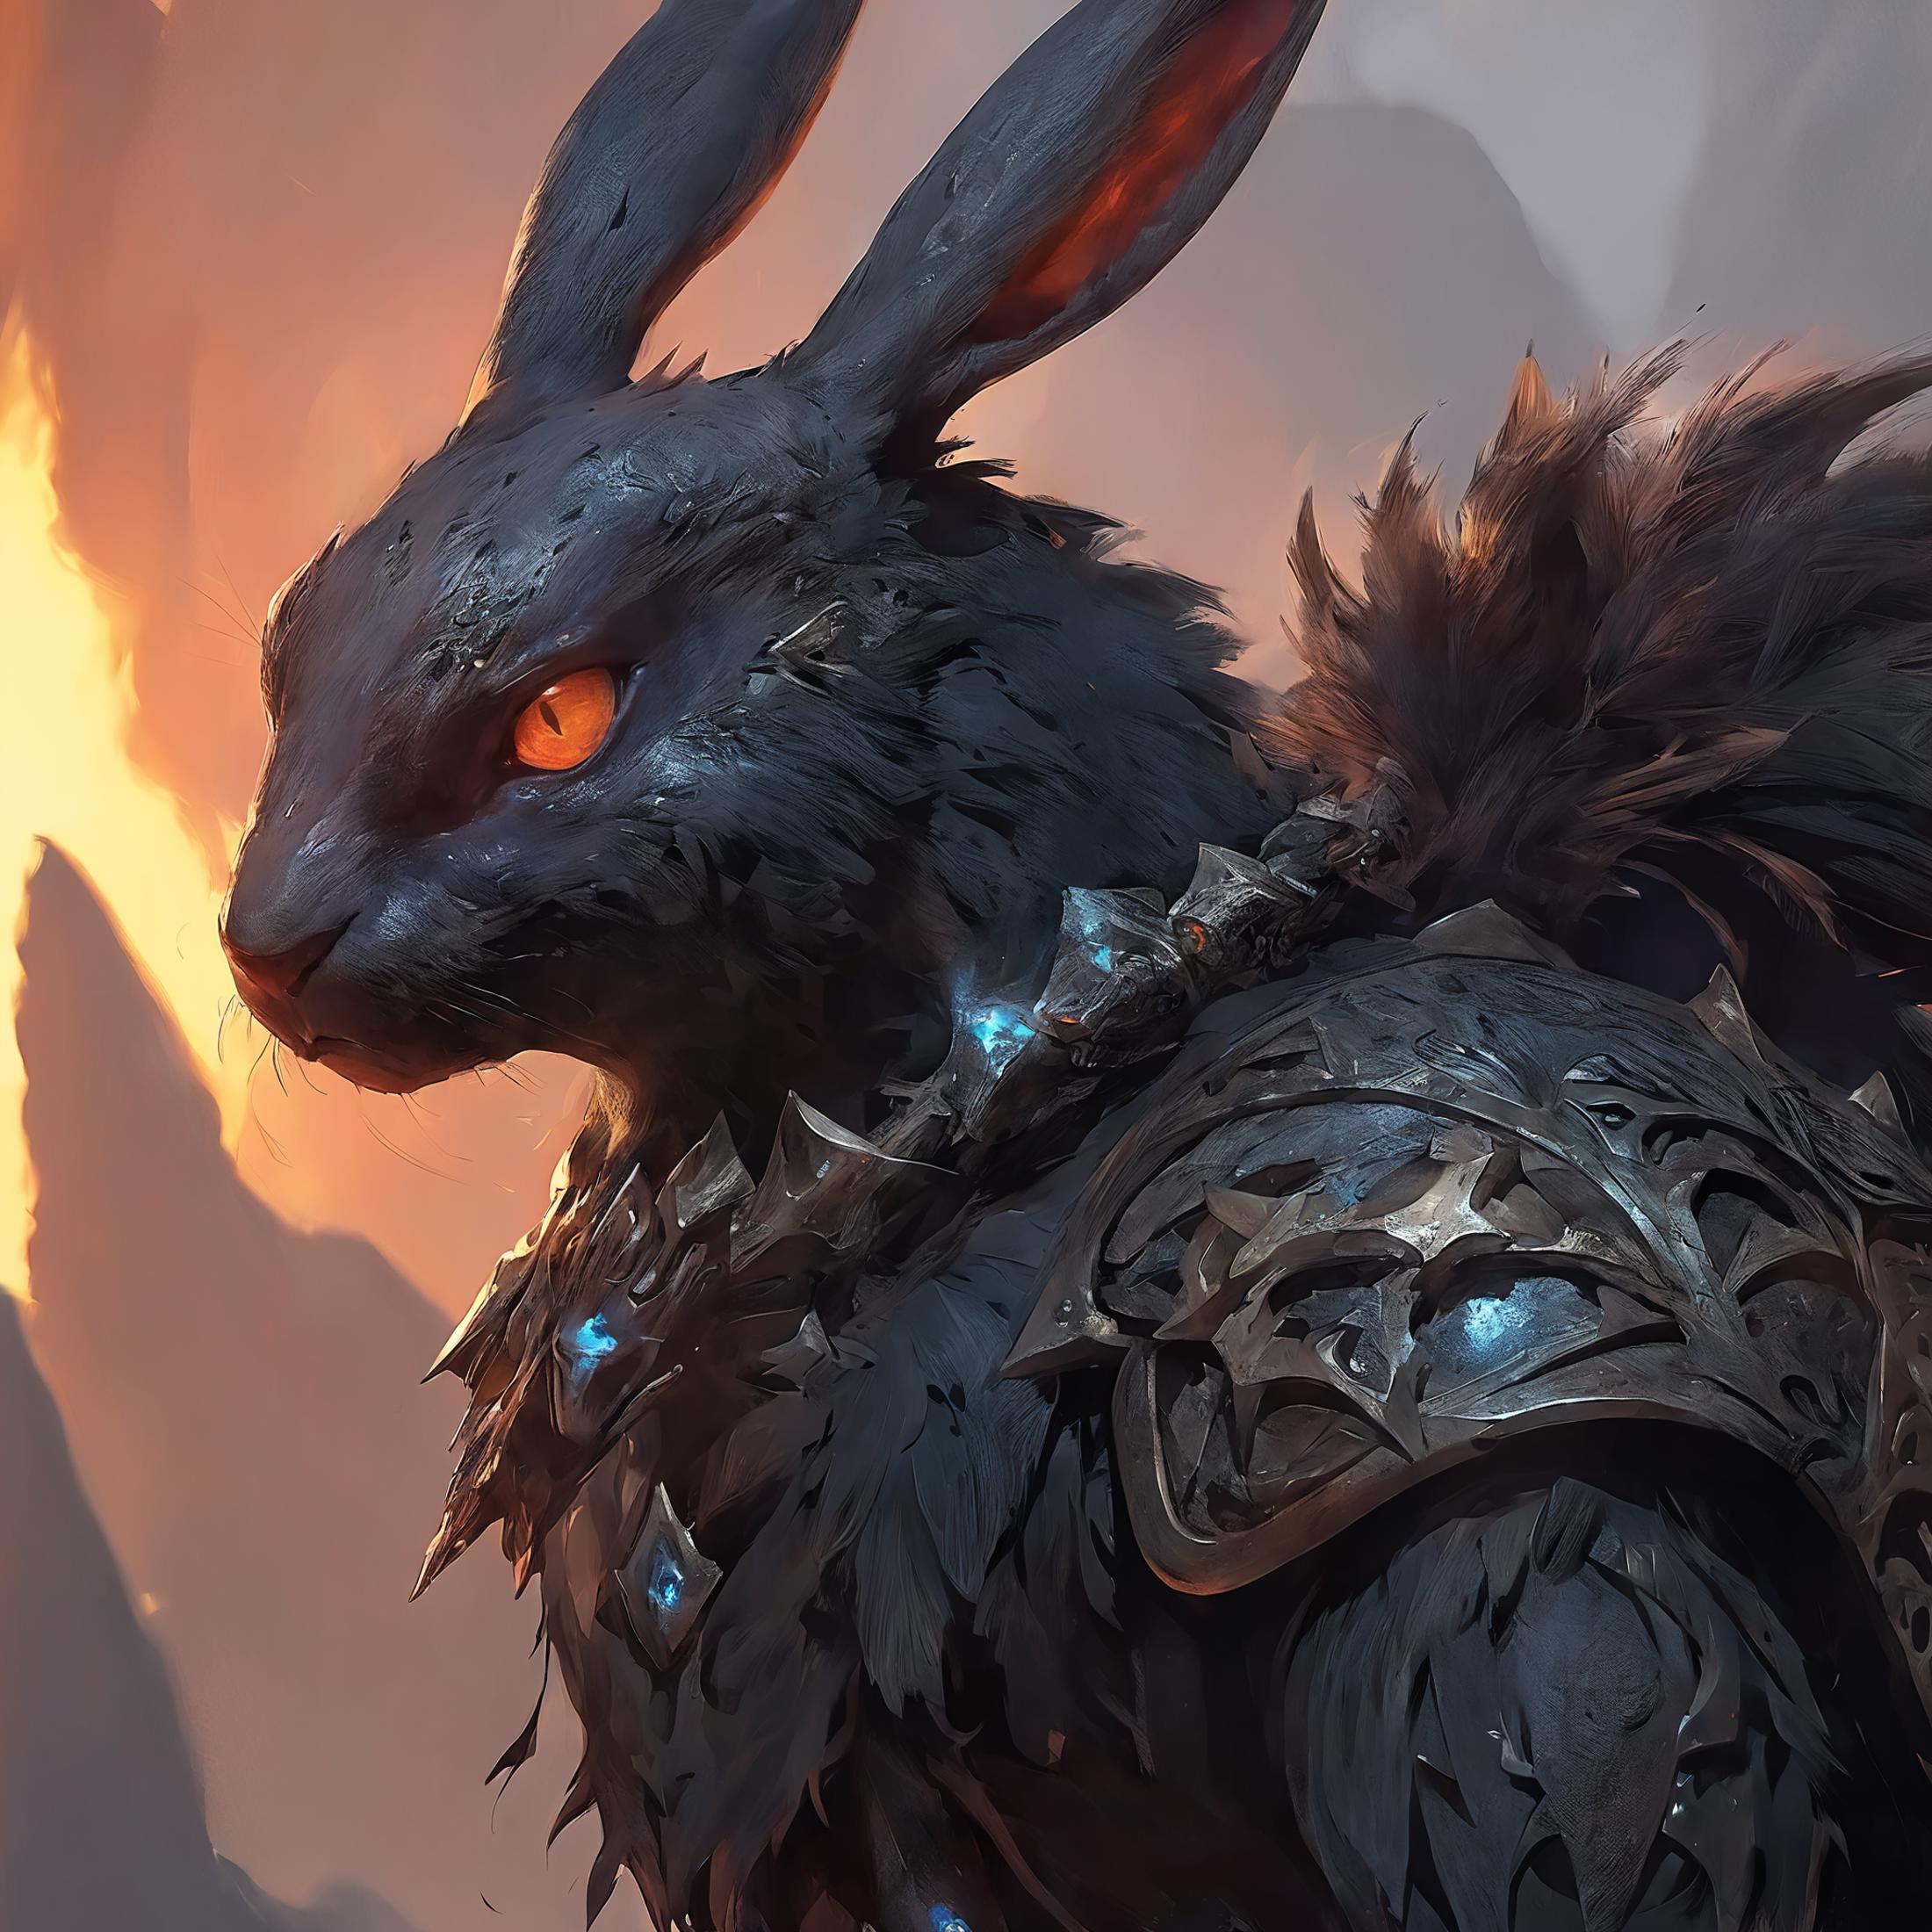 A large, dark, and spiky bunny with glowing red eyes stands in front of a mountain.